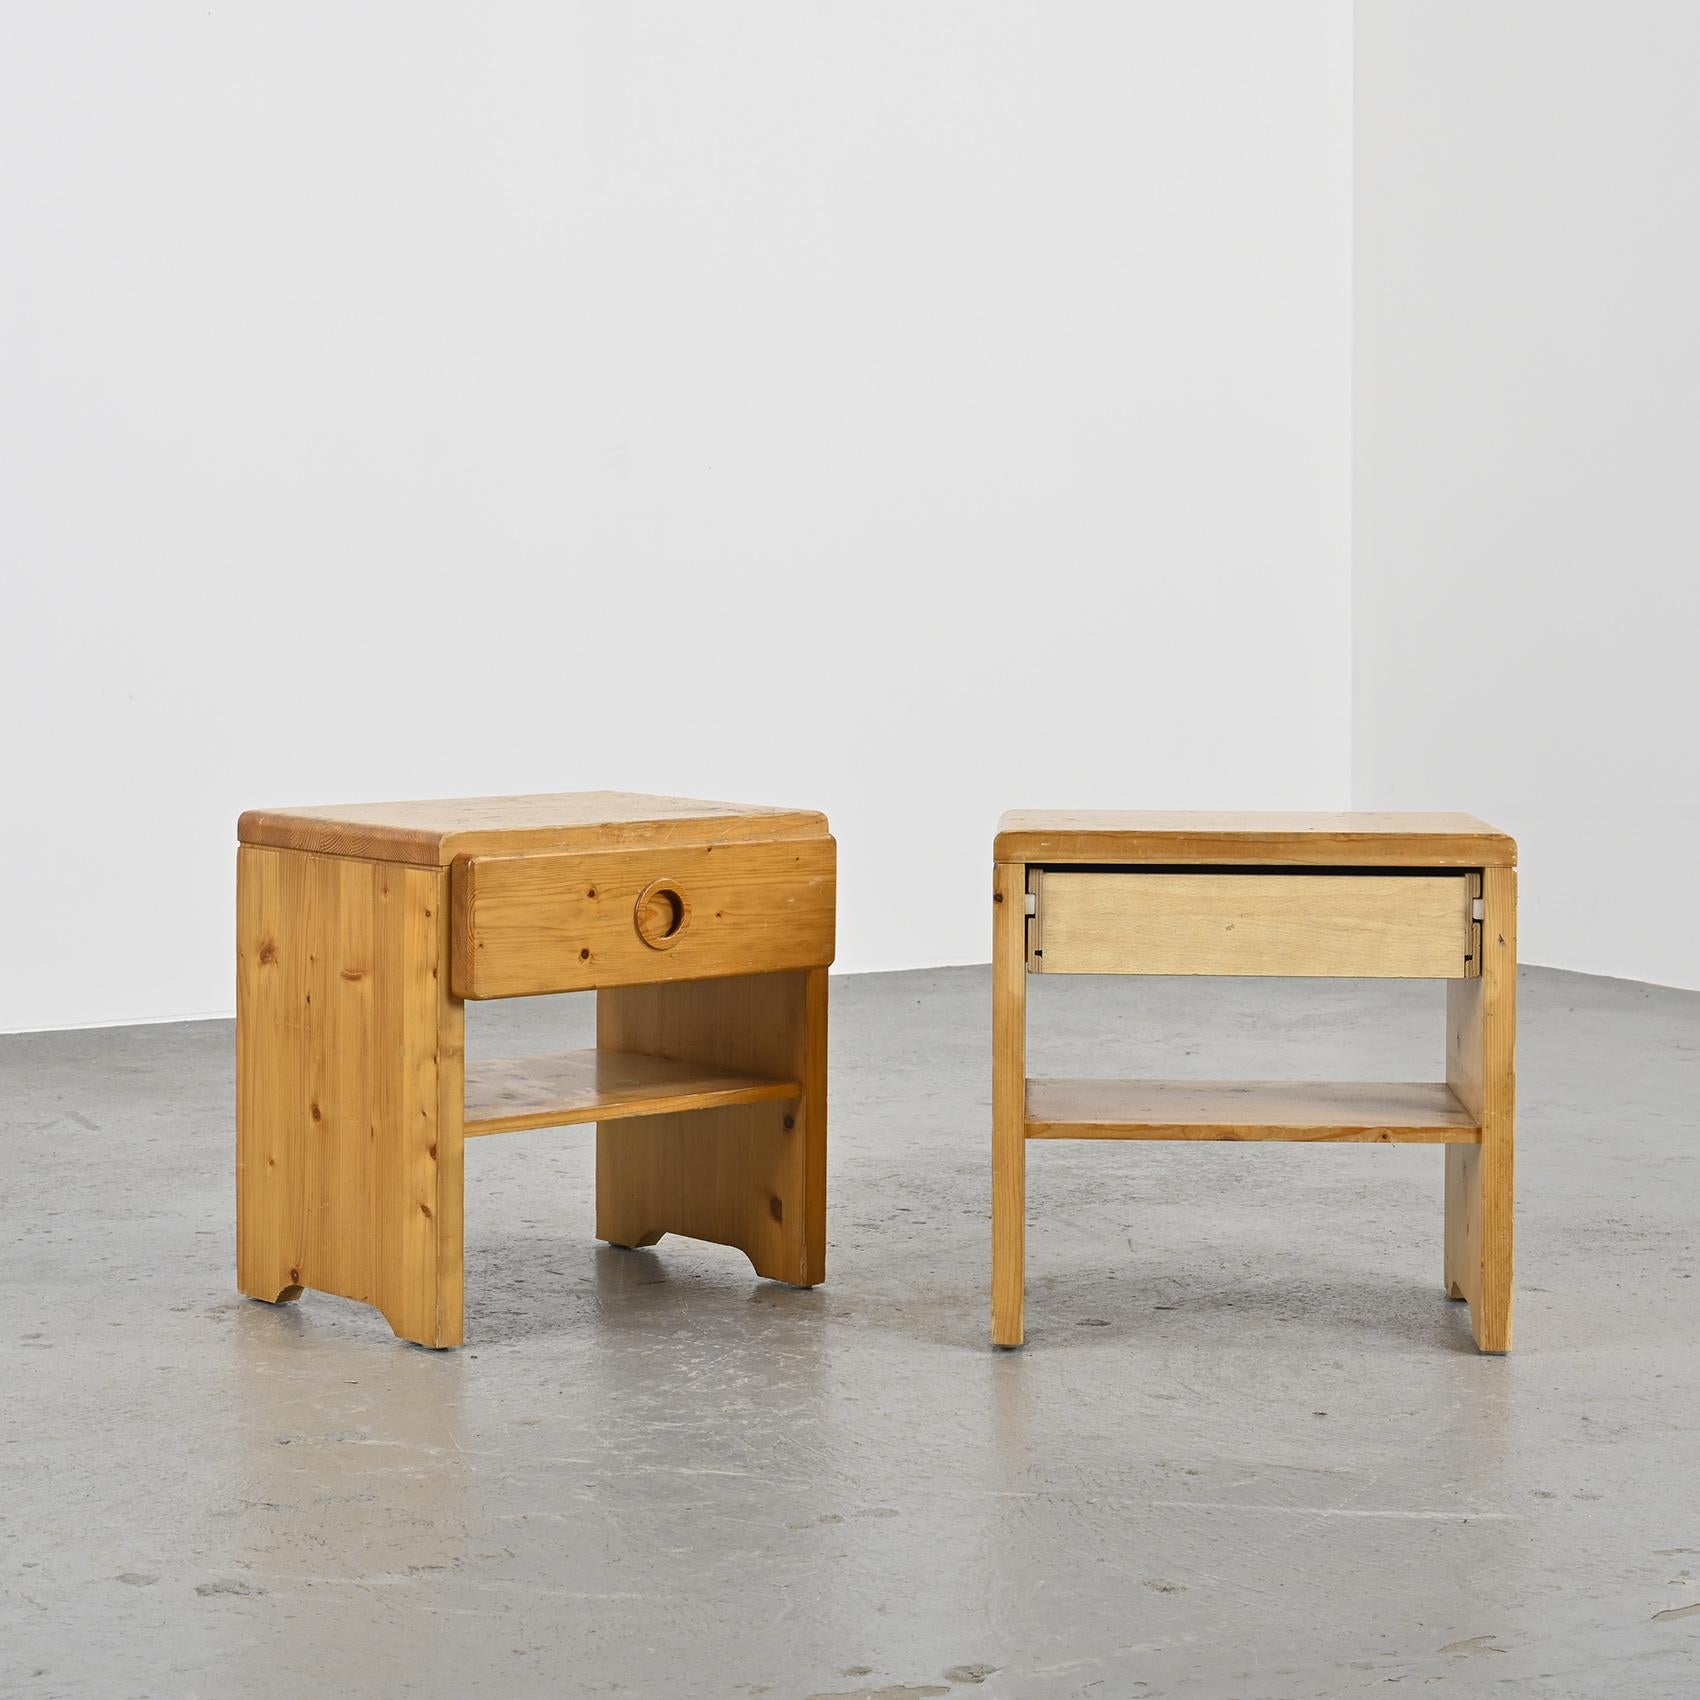 French Night Stands Selected By Charlotte Perriand For Les Arcs Ski Resort